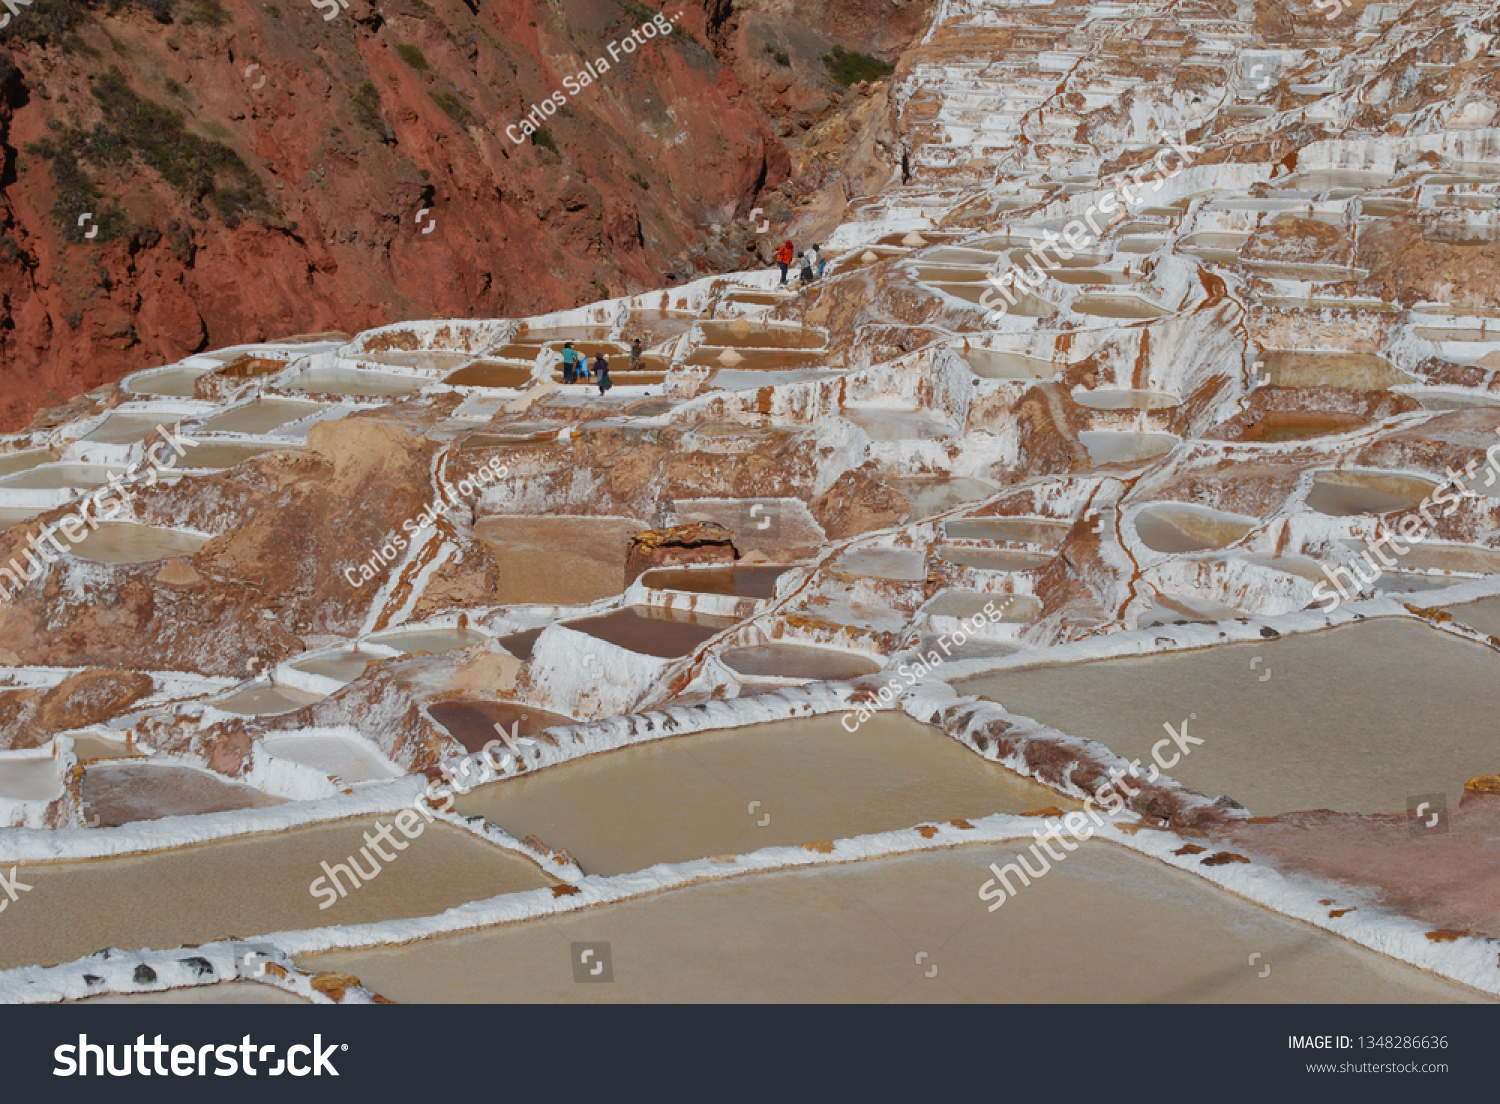 Different angles and perspectives of the evaporation ponds of the salt mines of Maras in Cusco. #1348286636